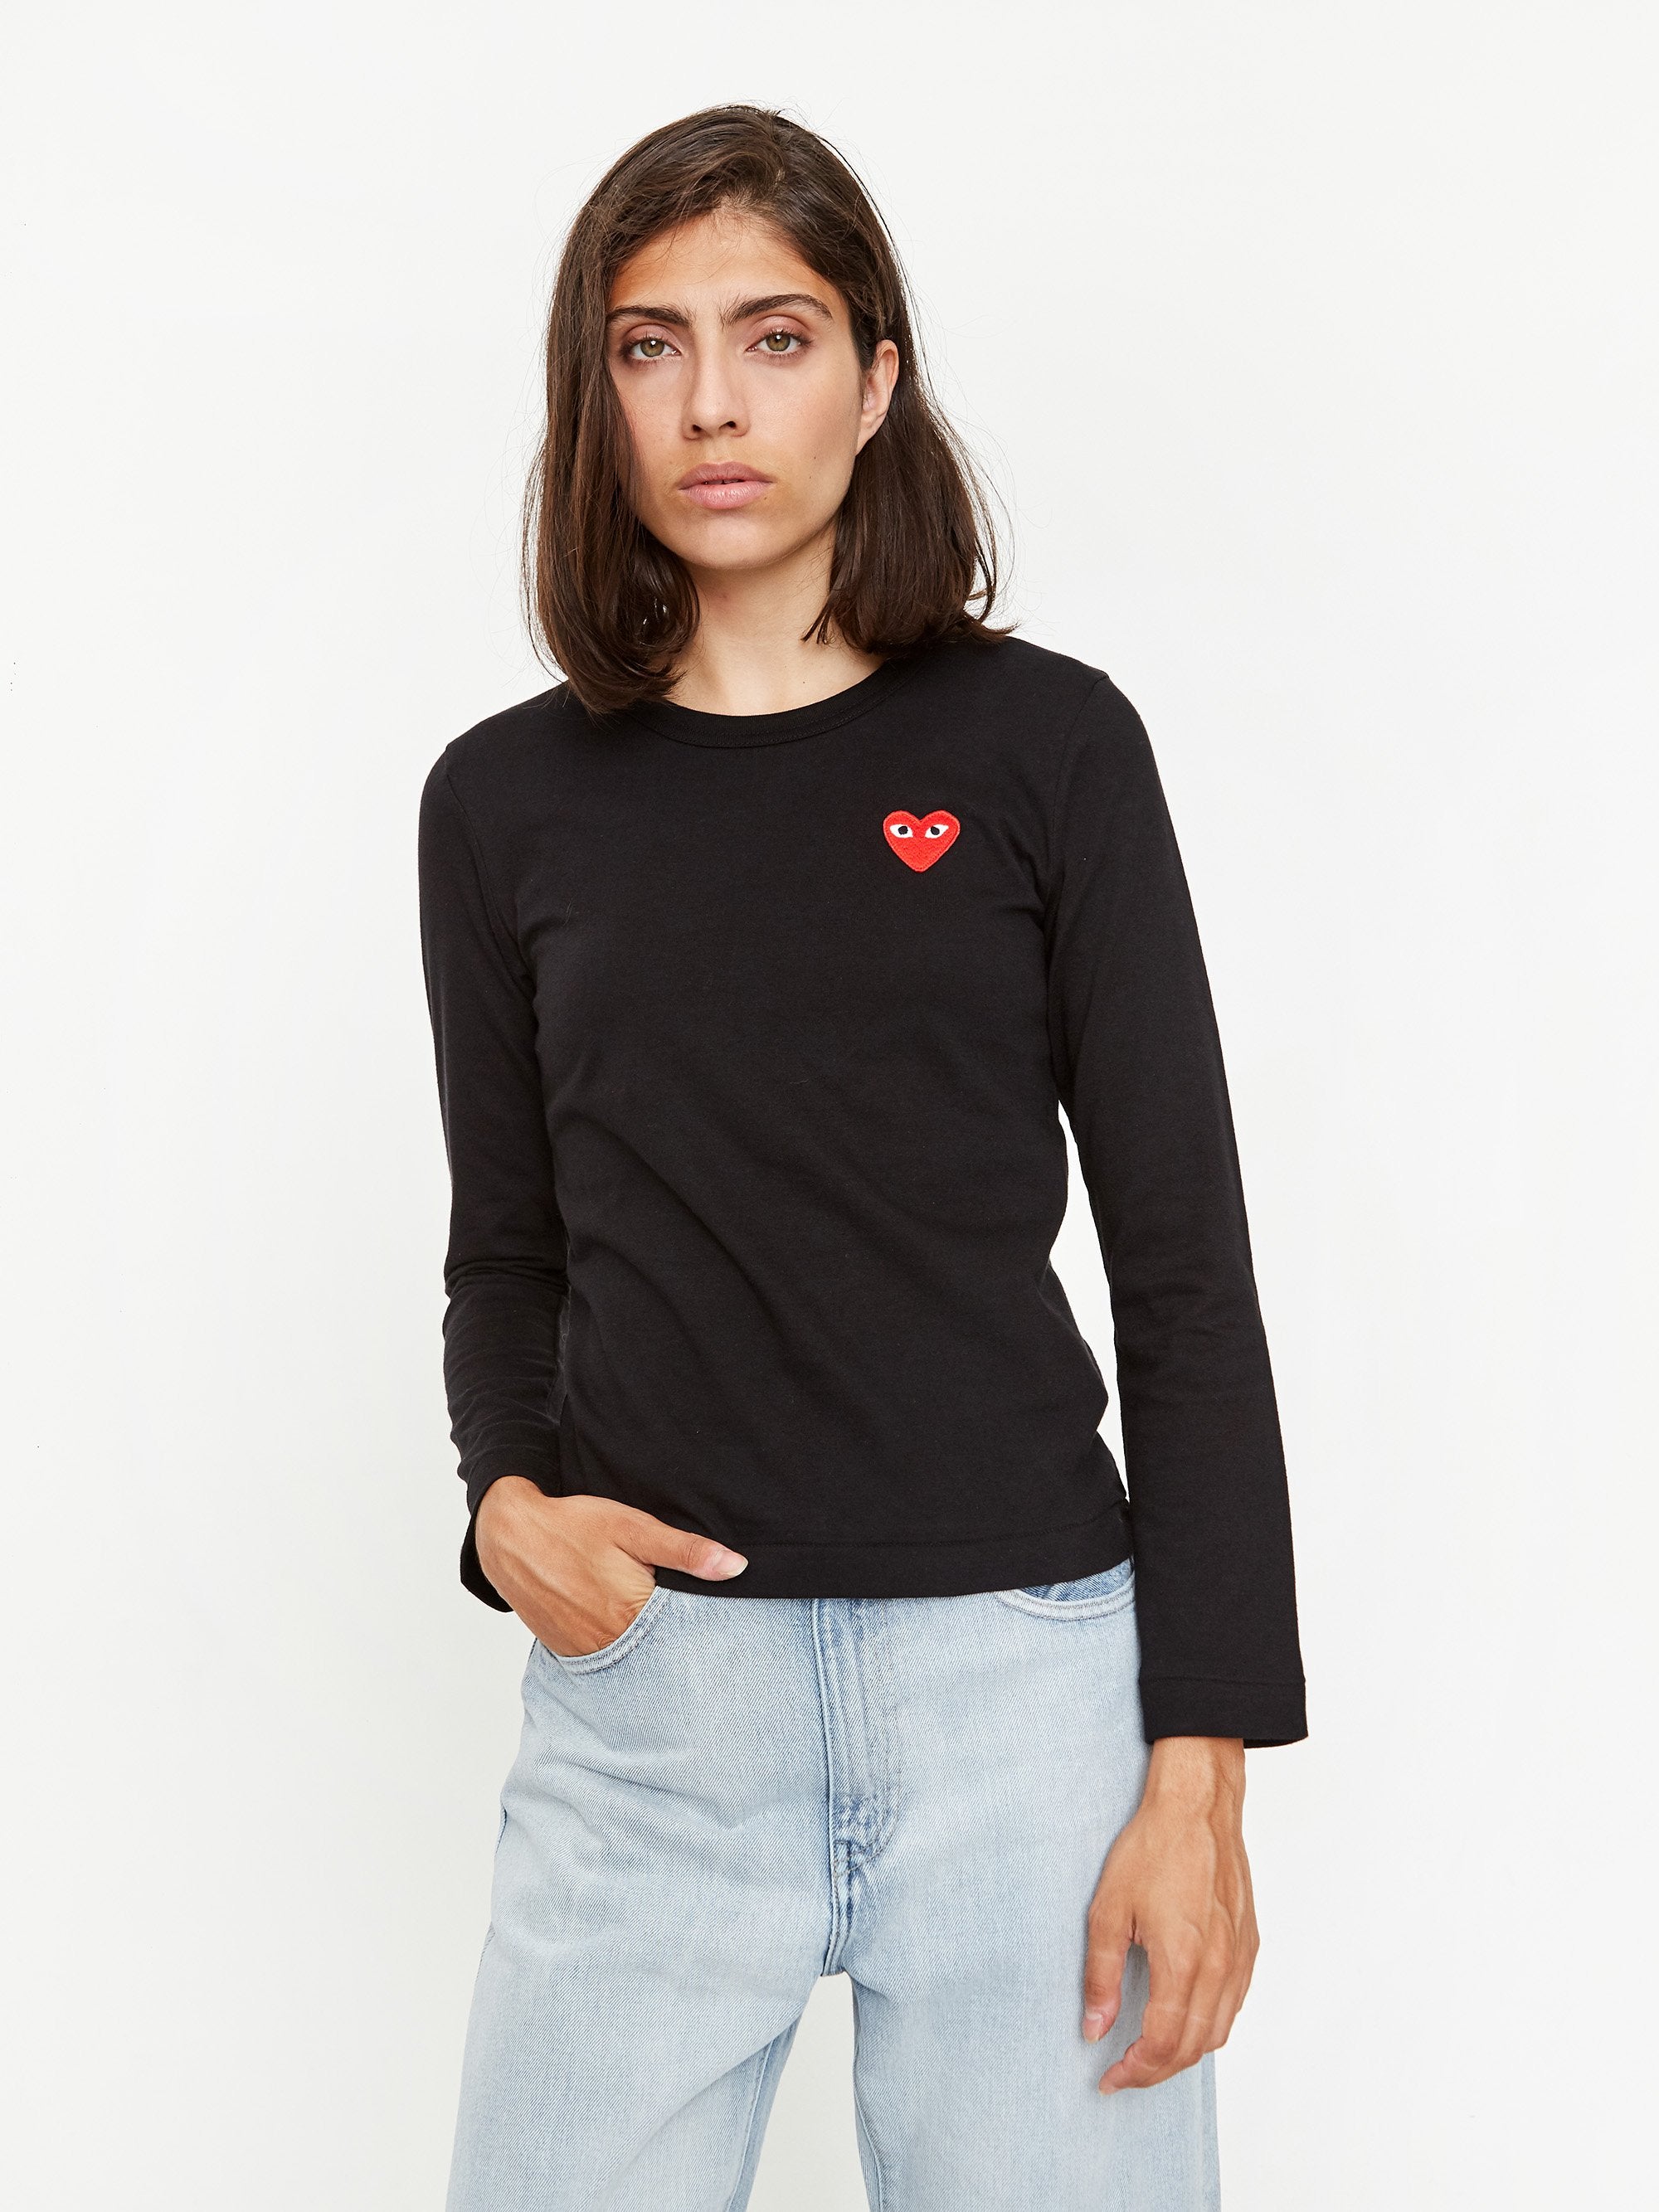 red and black comme des garcons shirt